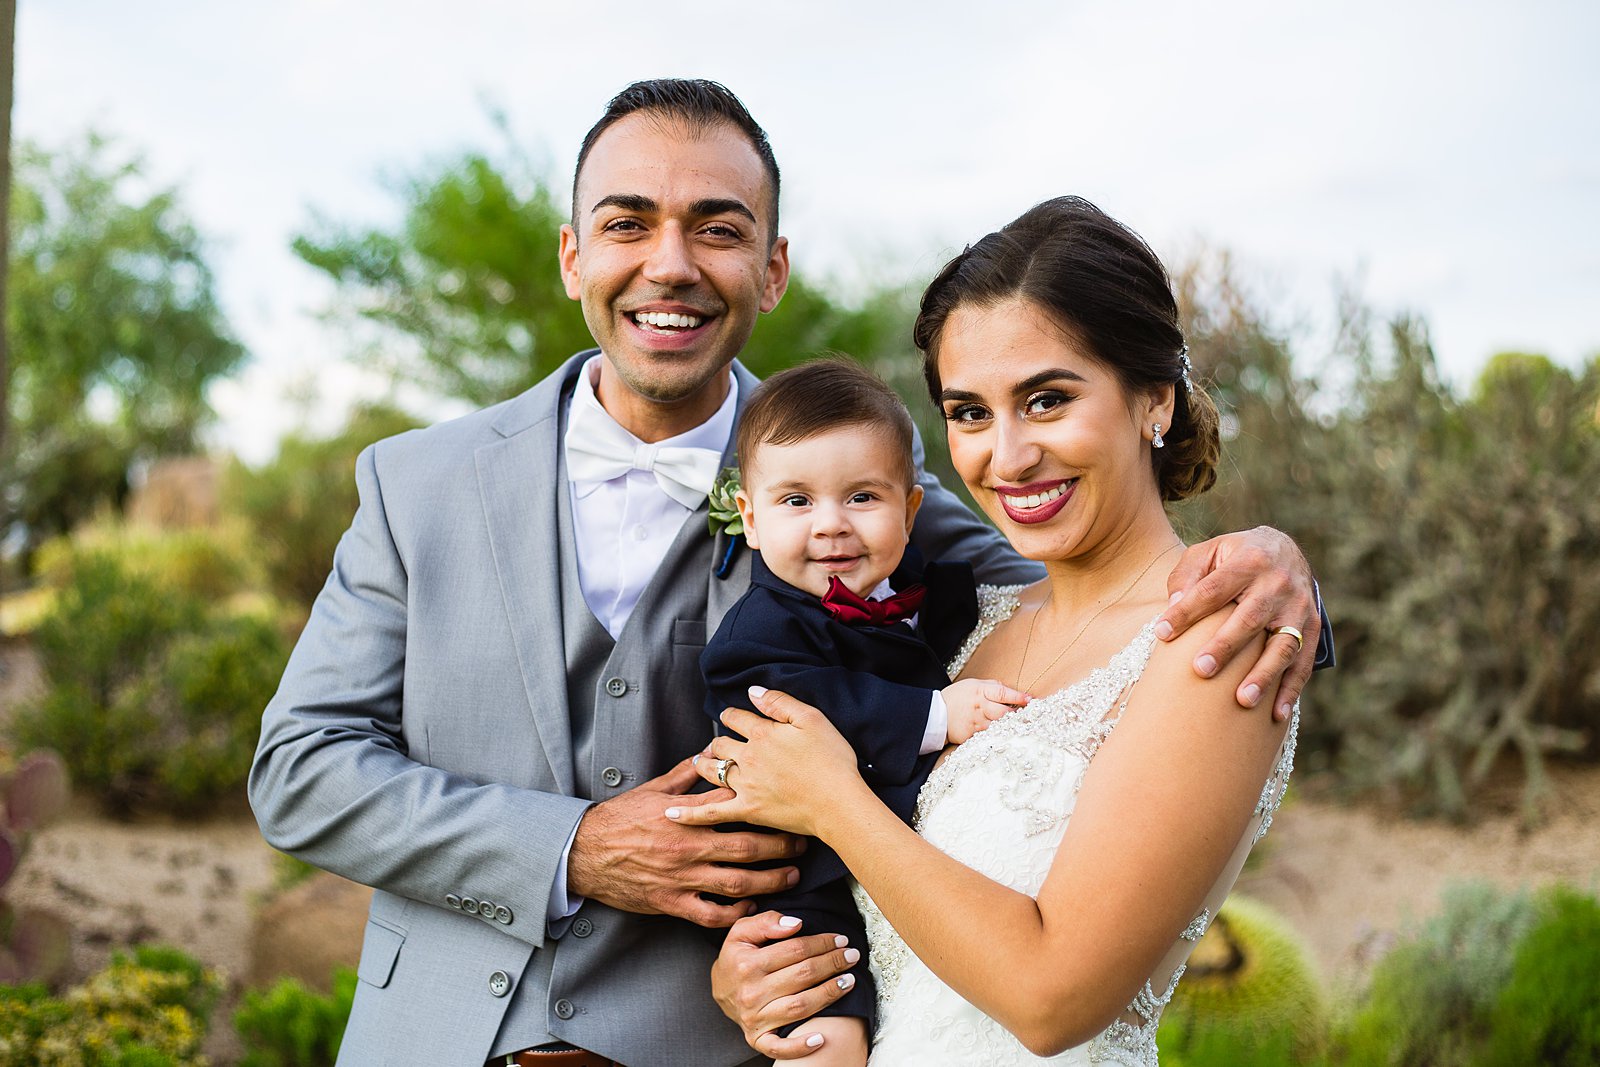 Bride and groom with their son at their Troon North wedding by Arizona wedding photographer PMA Photography.